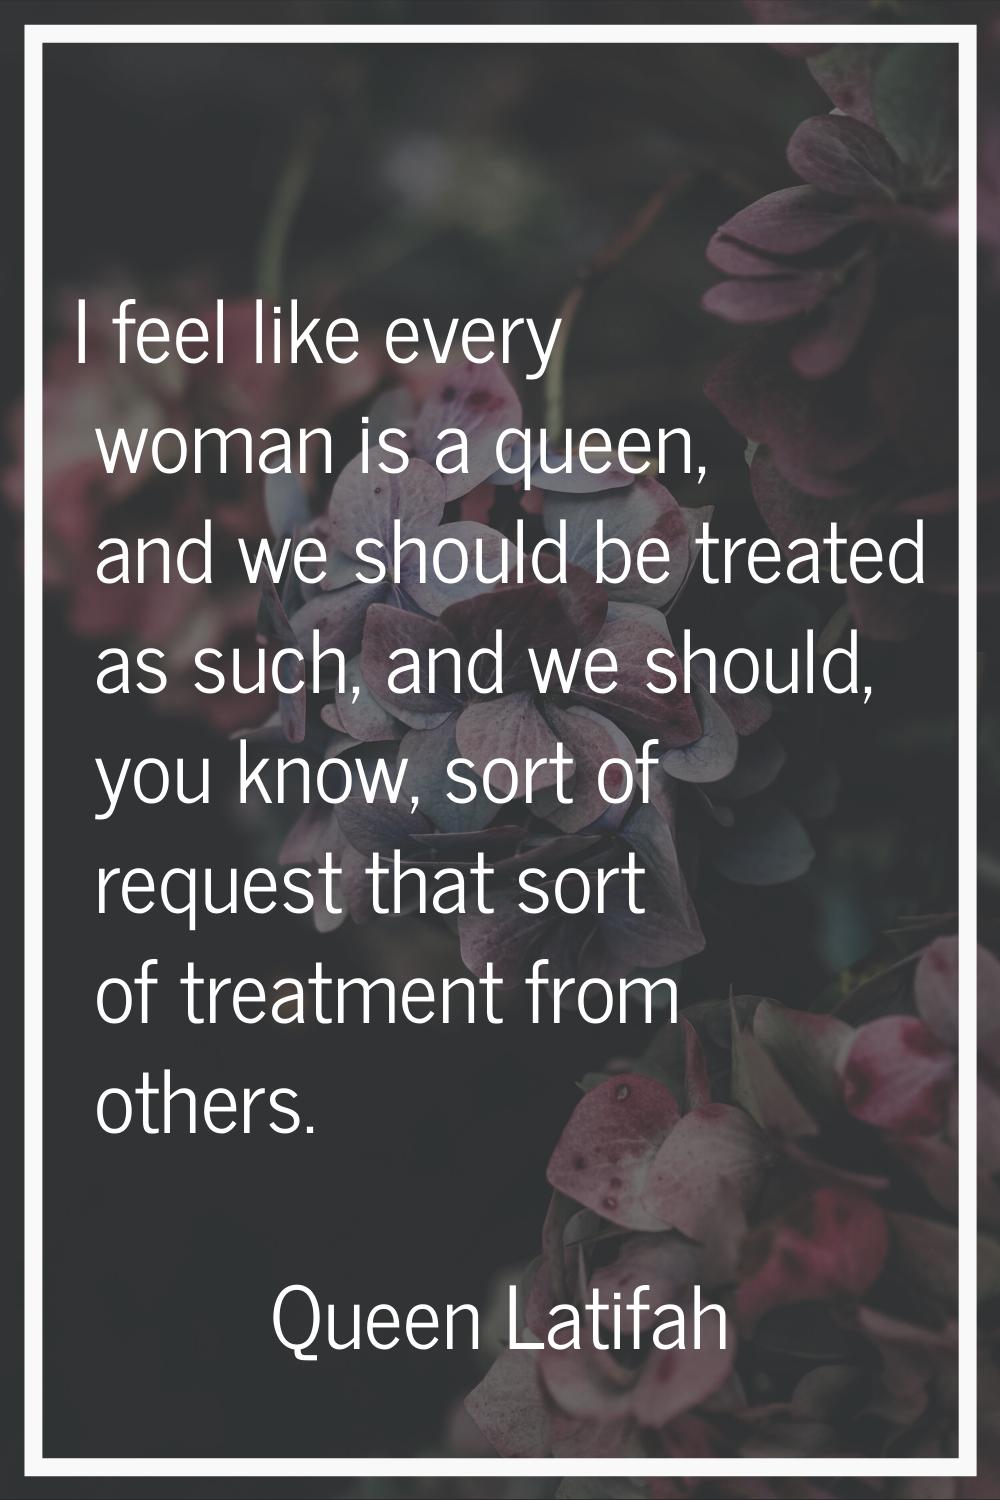 I feel like every woman is a queen, and we should be treated as such, and we should, you know, sort